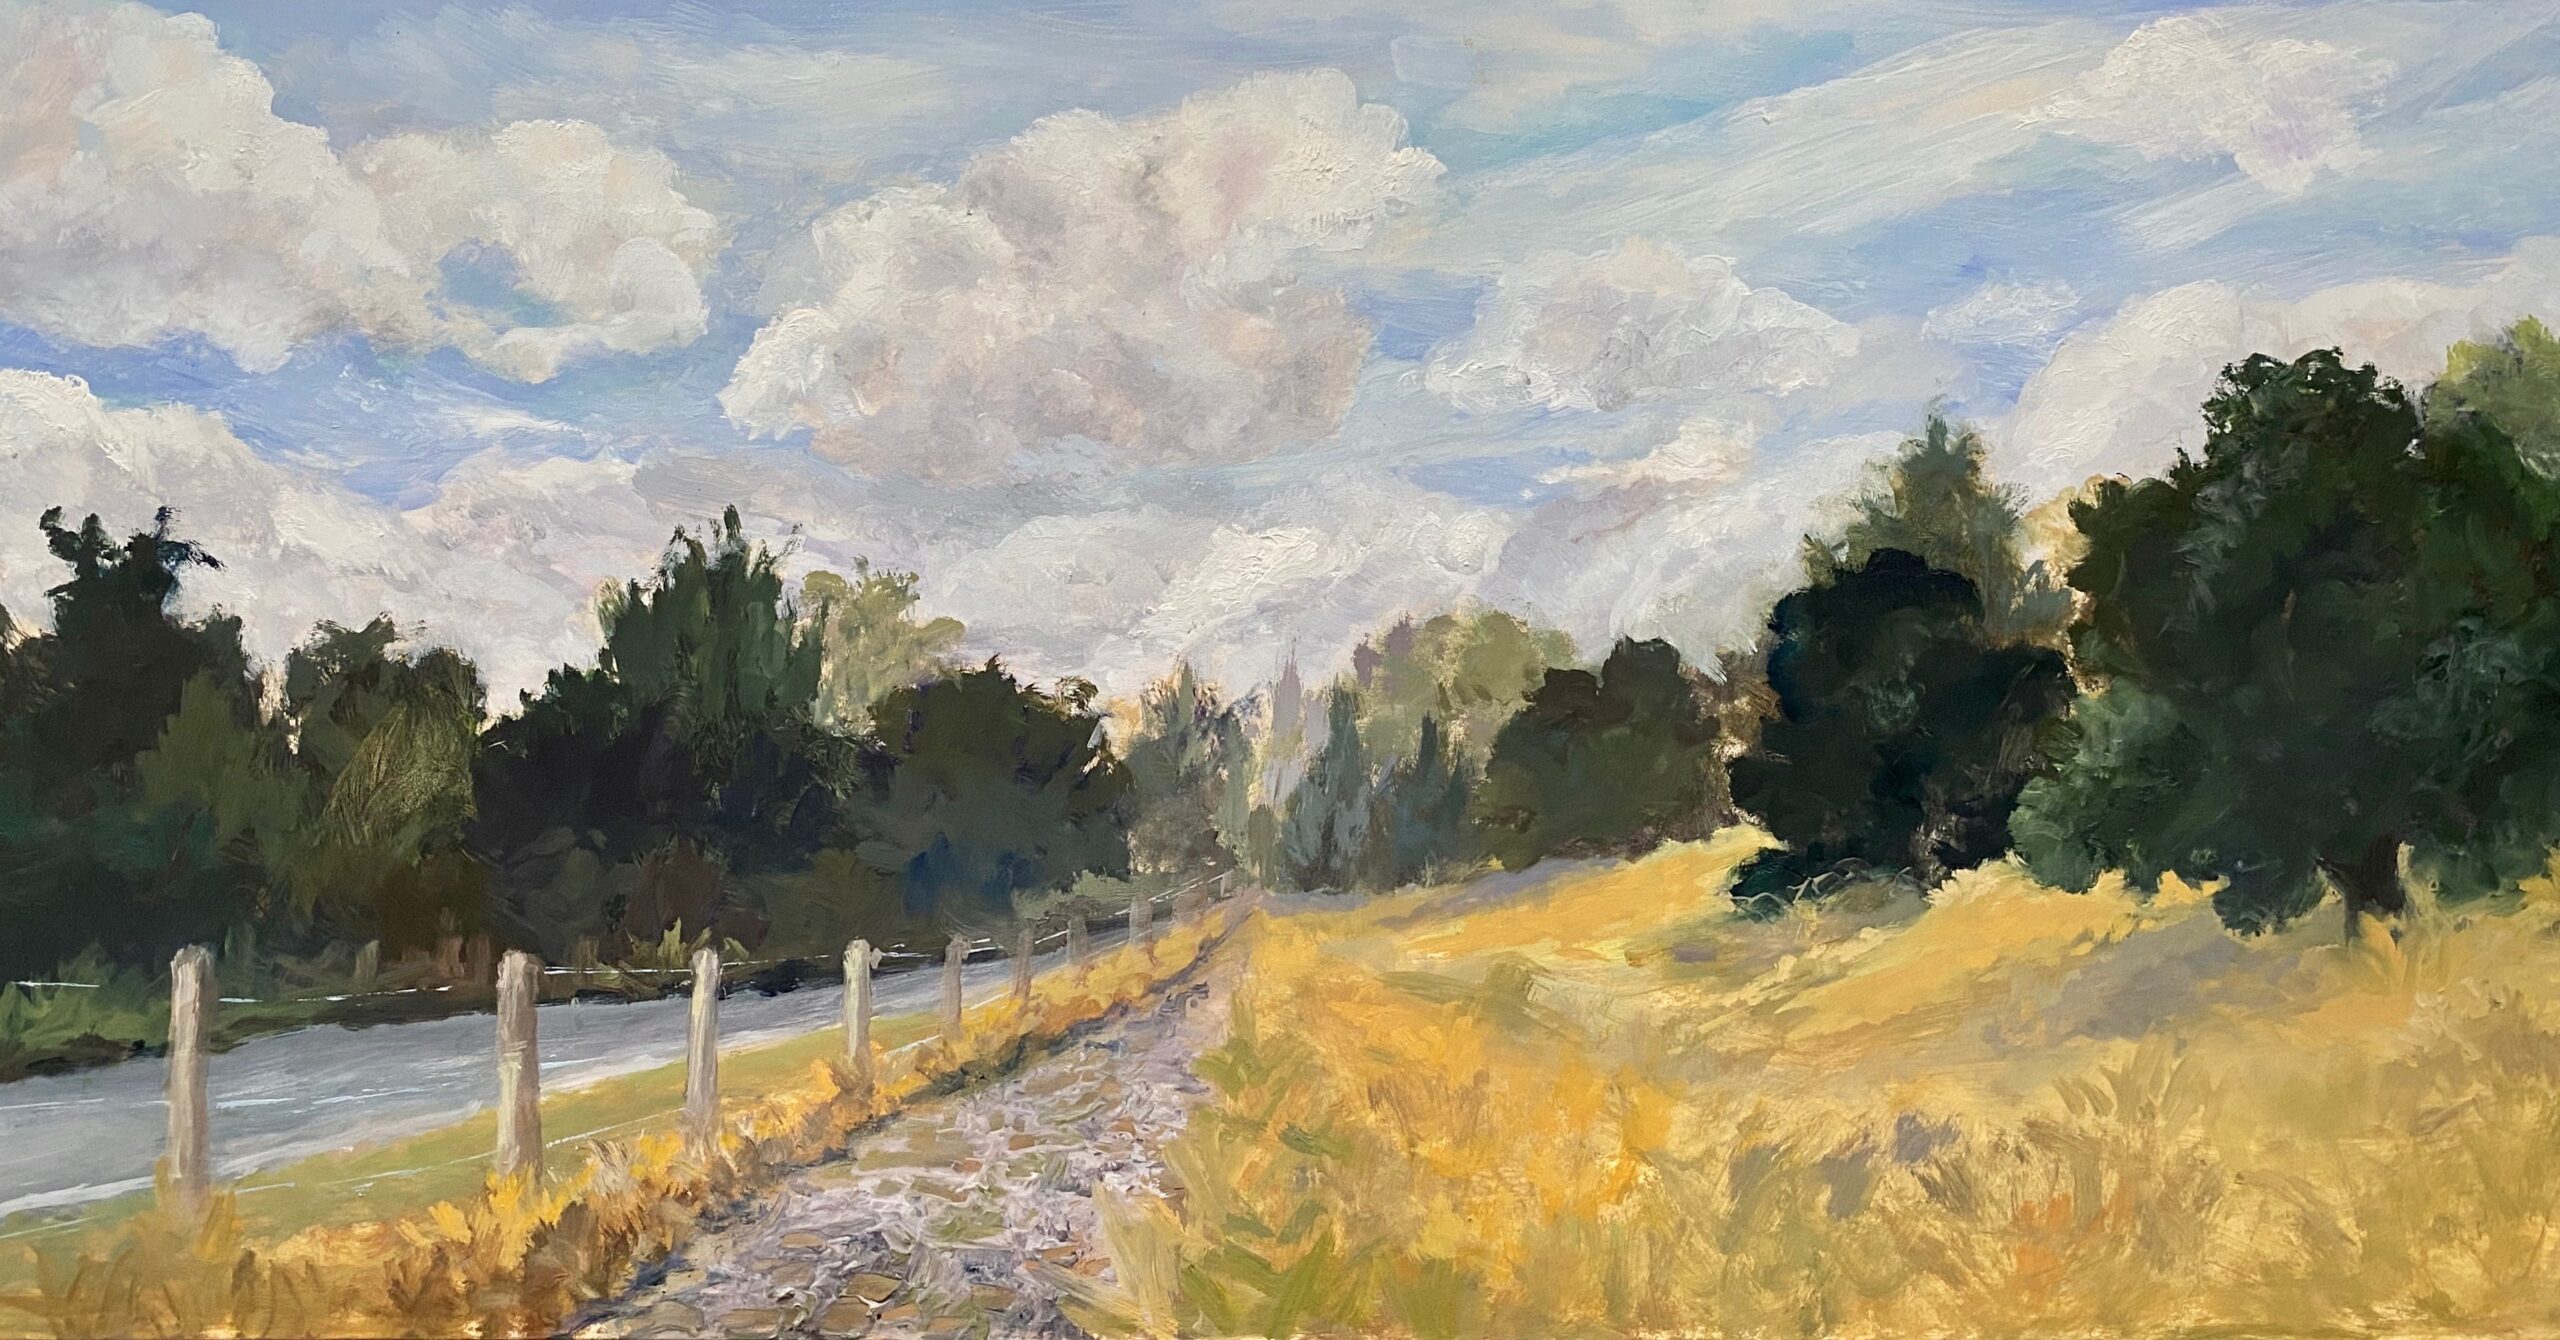 This is a painting of a scene I view practically daily while walking my dog Maddie at the Horse Park. Wonderful clouds decorate the landscape.